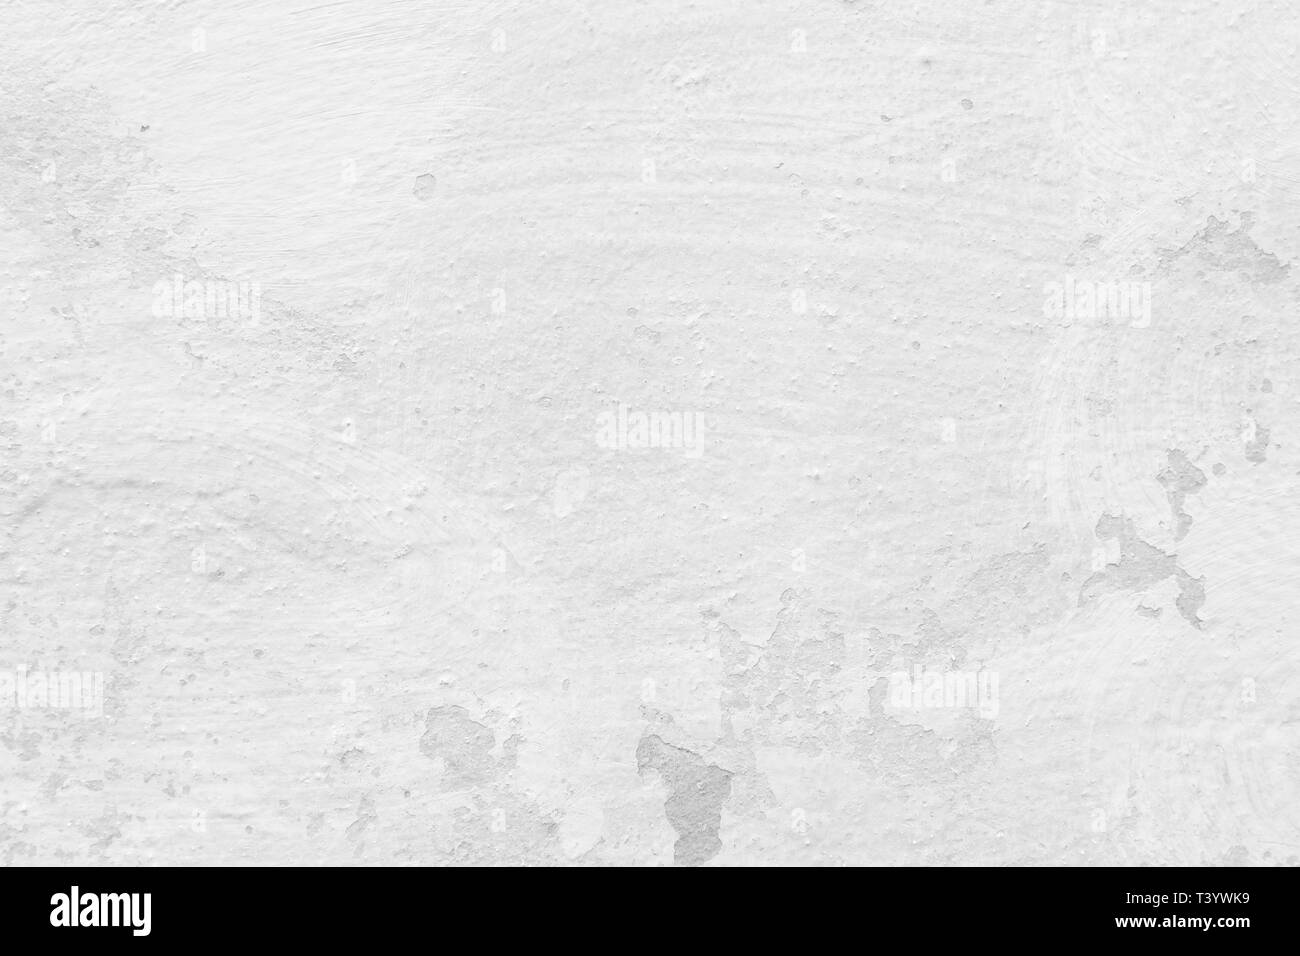 Close-up of a stone or concrete wall painted in white, paint slightly peeled off. Full frame texture background in black and white. Stock Photo